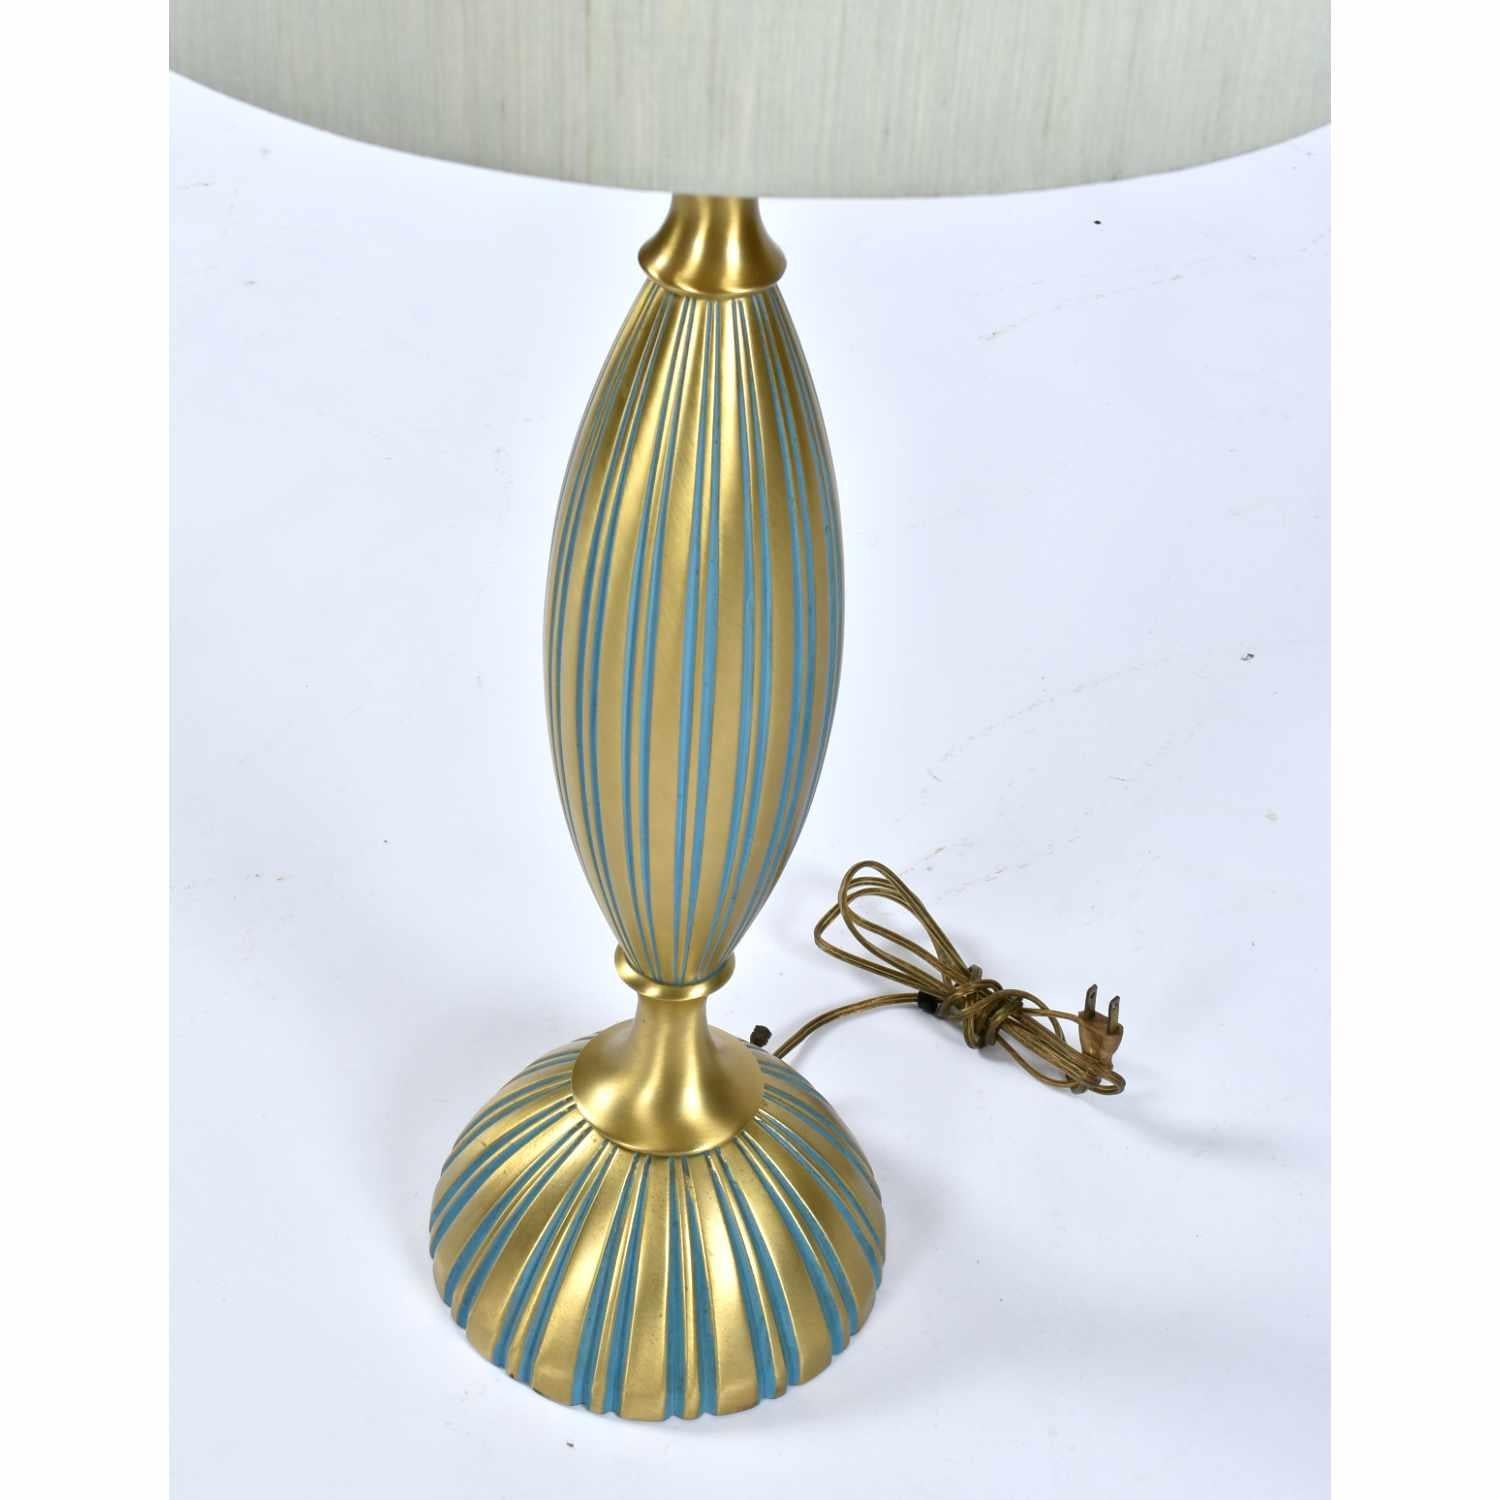 Rembrandt Teal and Gold Hourglass Shaped Midcentury Table Lamp For Sale 5